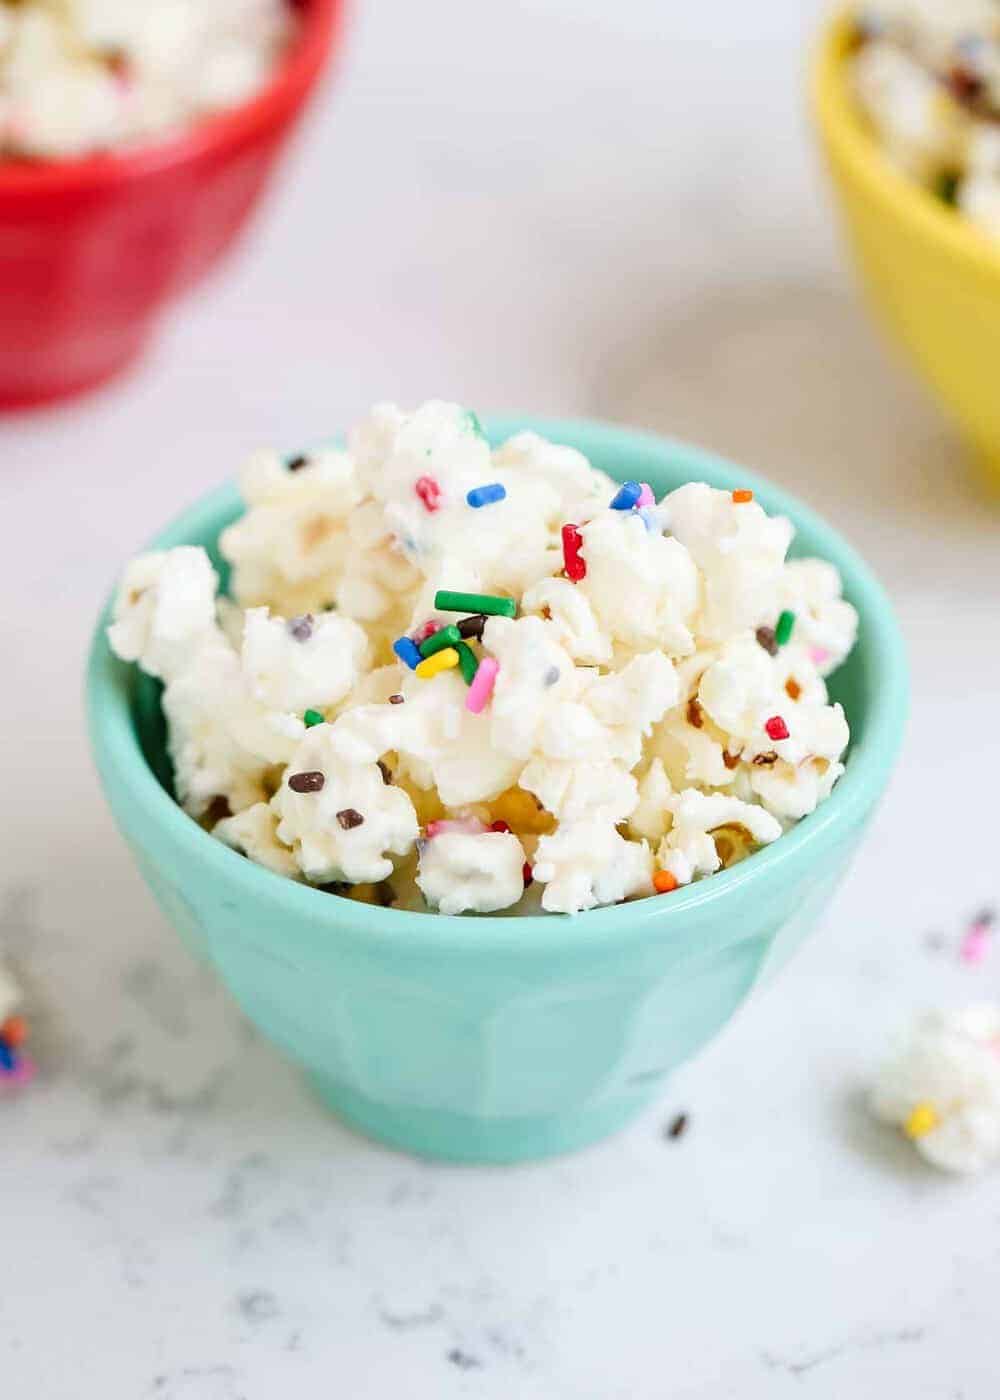 Birthday cake popcorn with sprinkles in a blue bowl.